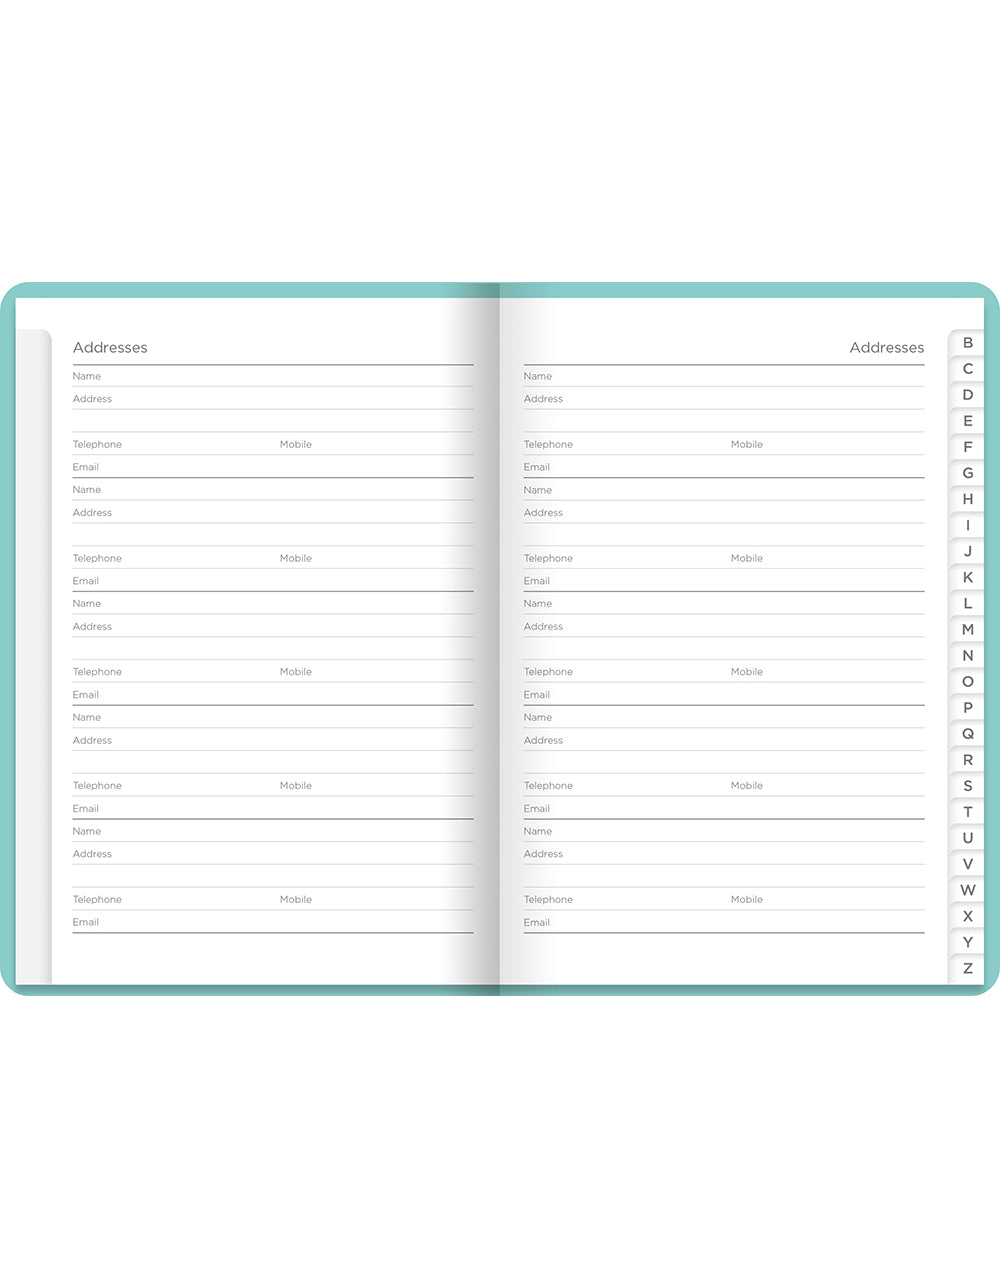 Dazzle A6 Address Book Turquoise#colour_turquoise